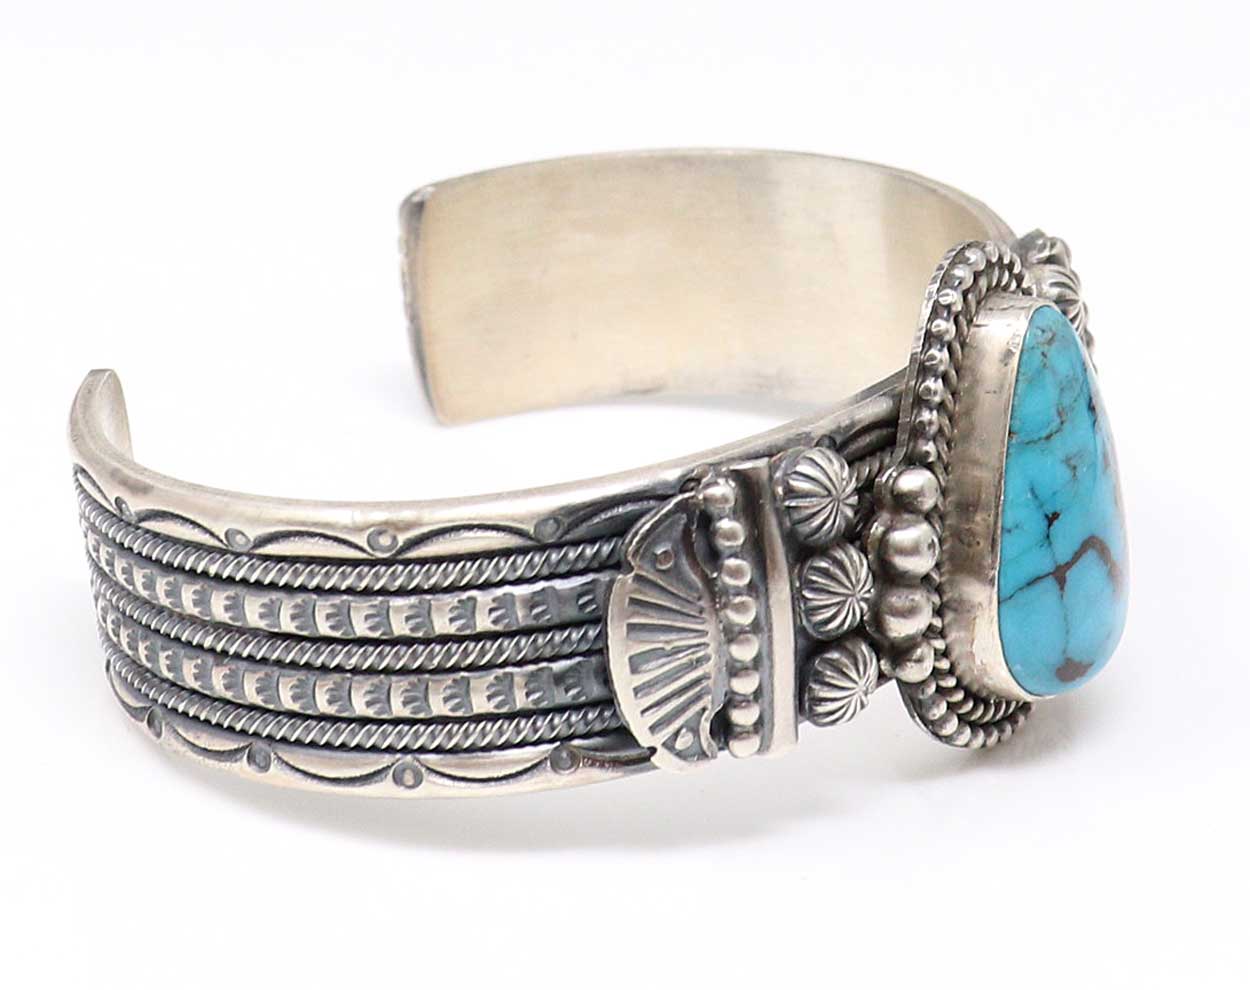 Turquoise Bracelet by Micheal Calladito